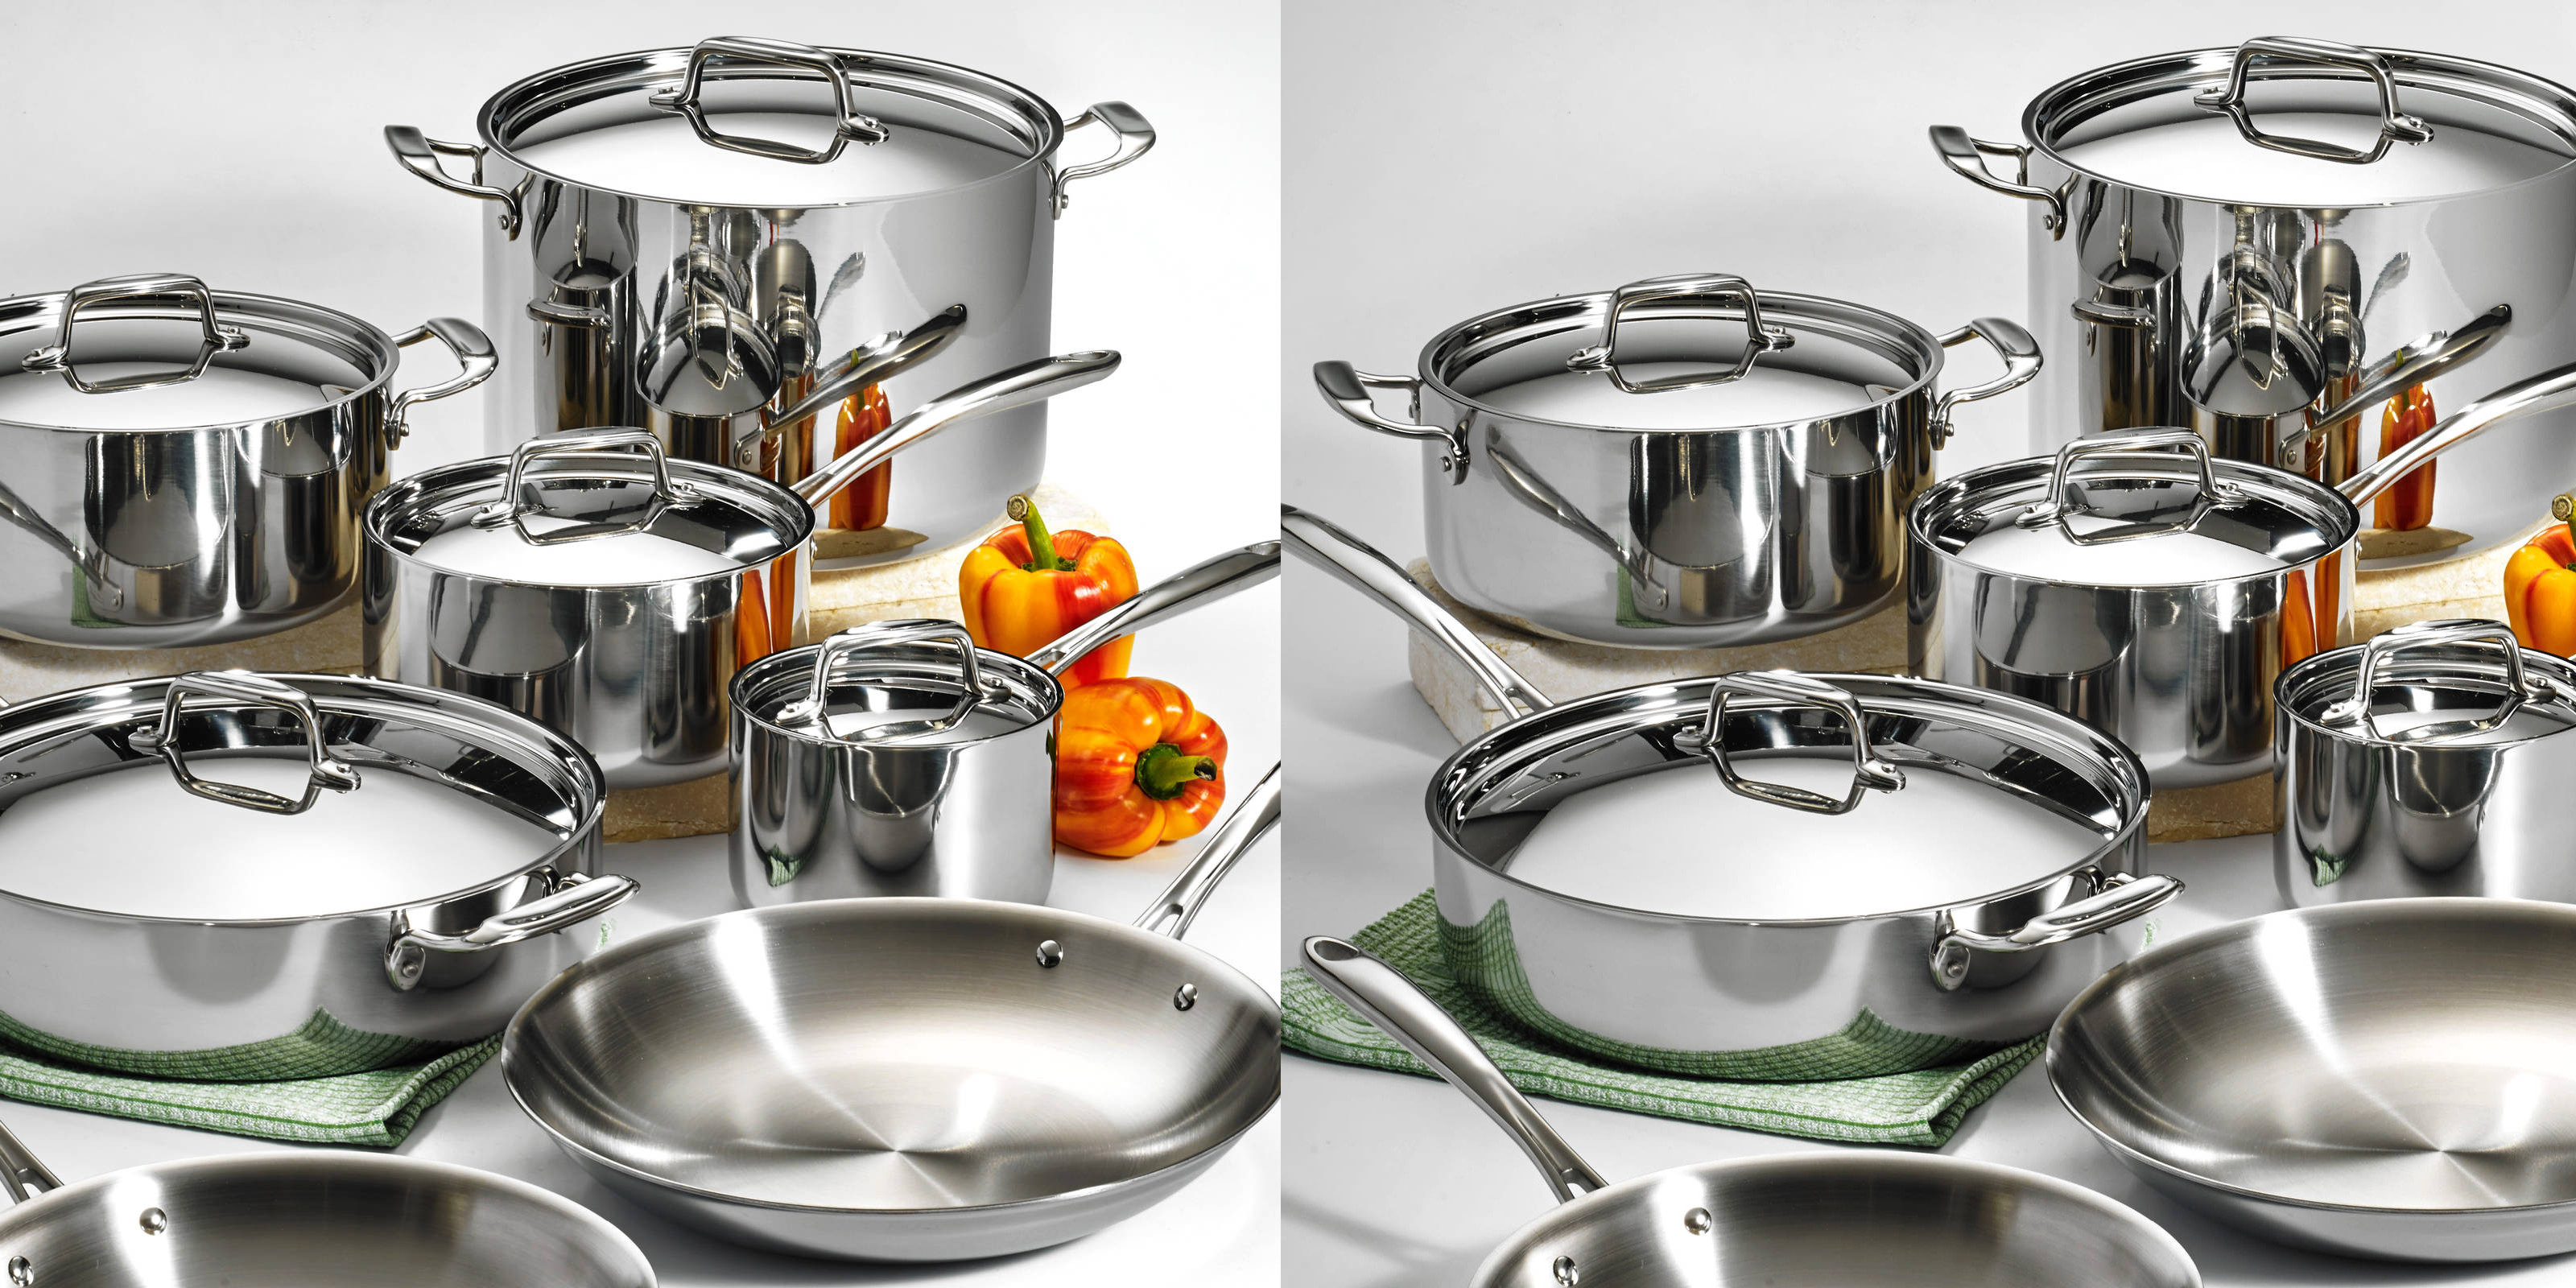 Upgrade that old cookware w/ Tramontina's 12-Piece Stainless Steel